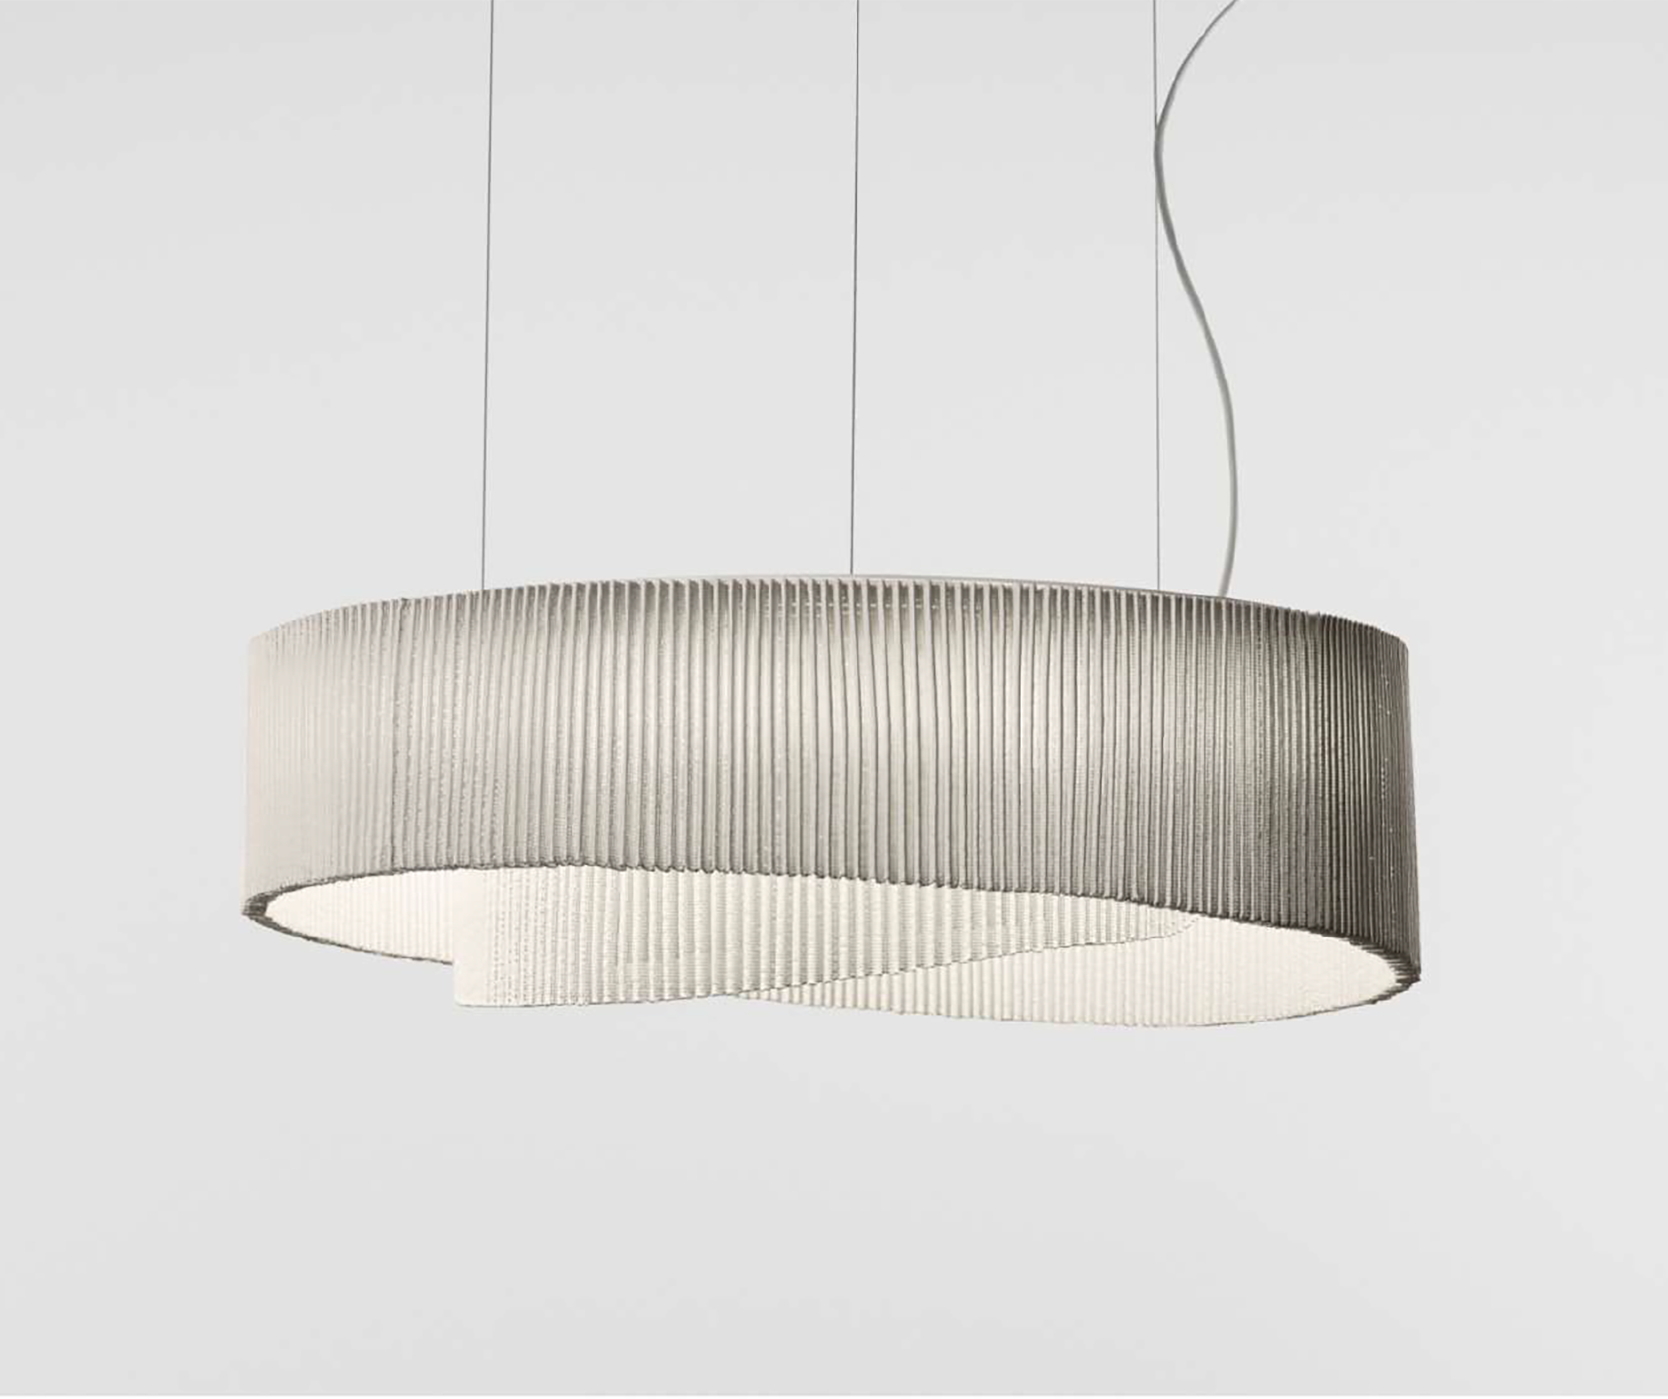 New-York-Design-Center-WNWN-Calger-Lighting-The-Anel-Collection-Gallery-2